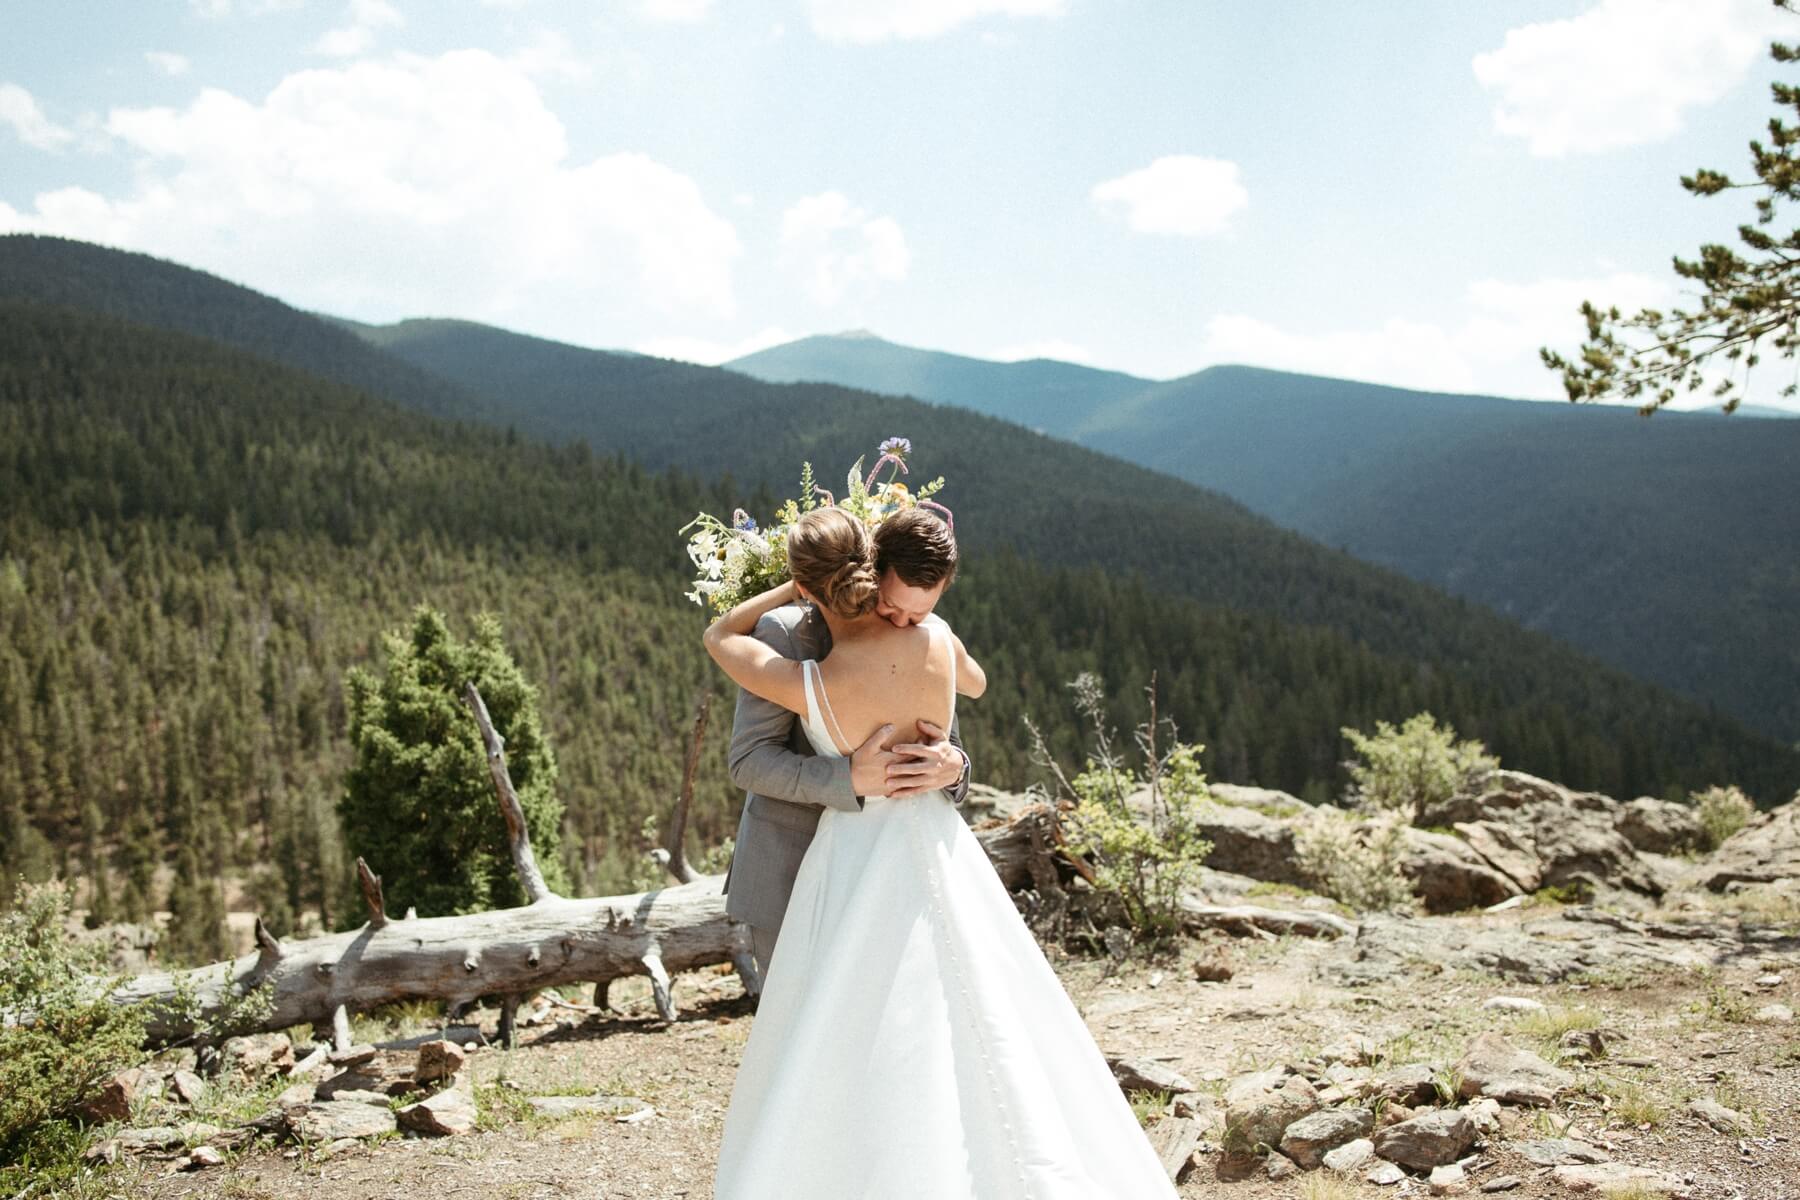 Bride and groom hugging during first look at overlook with mountains behind them